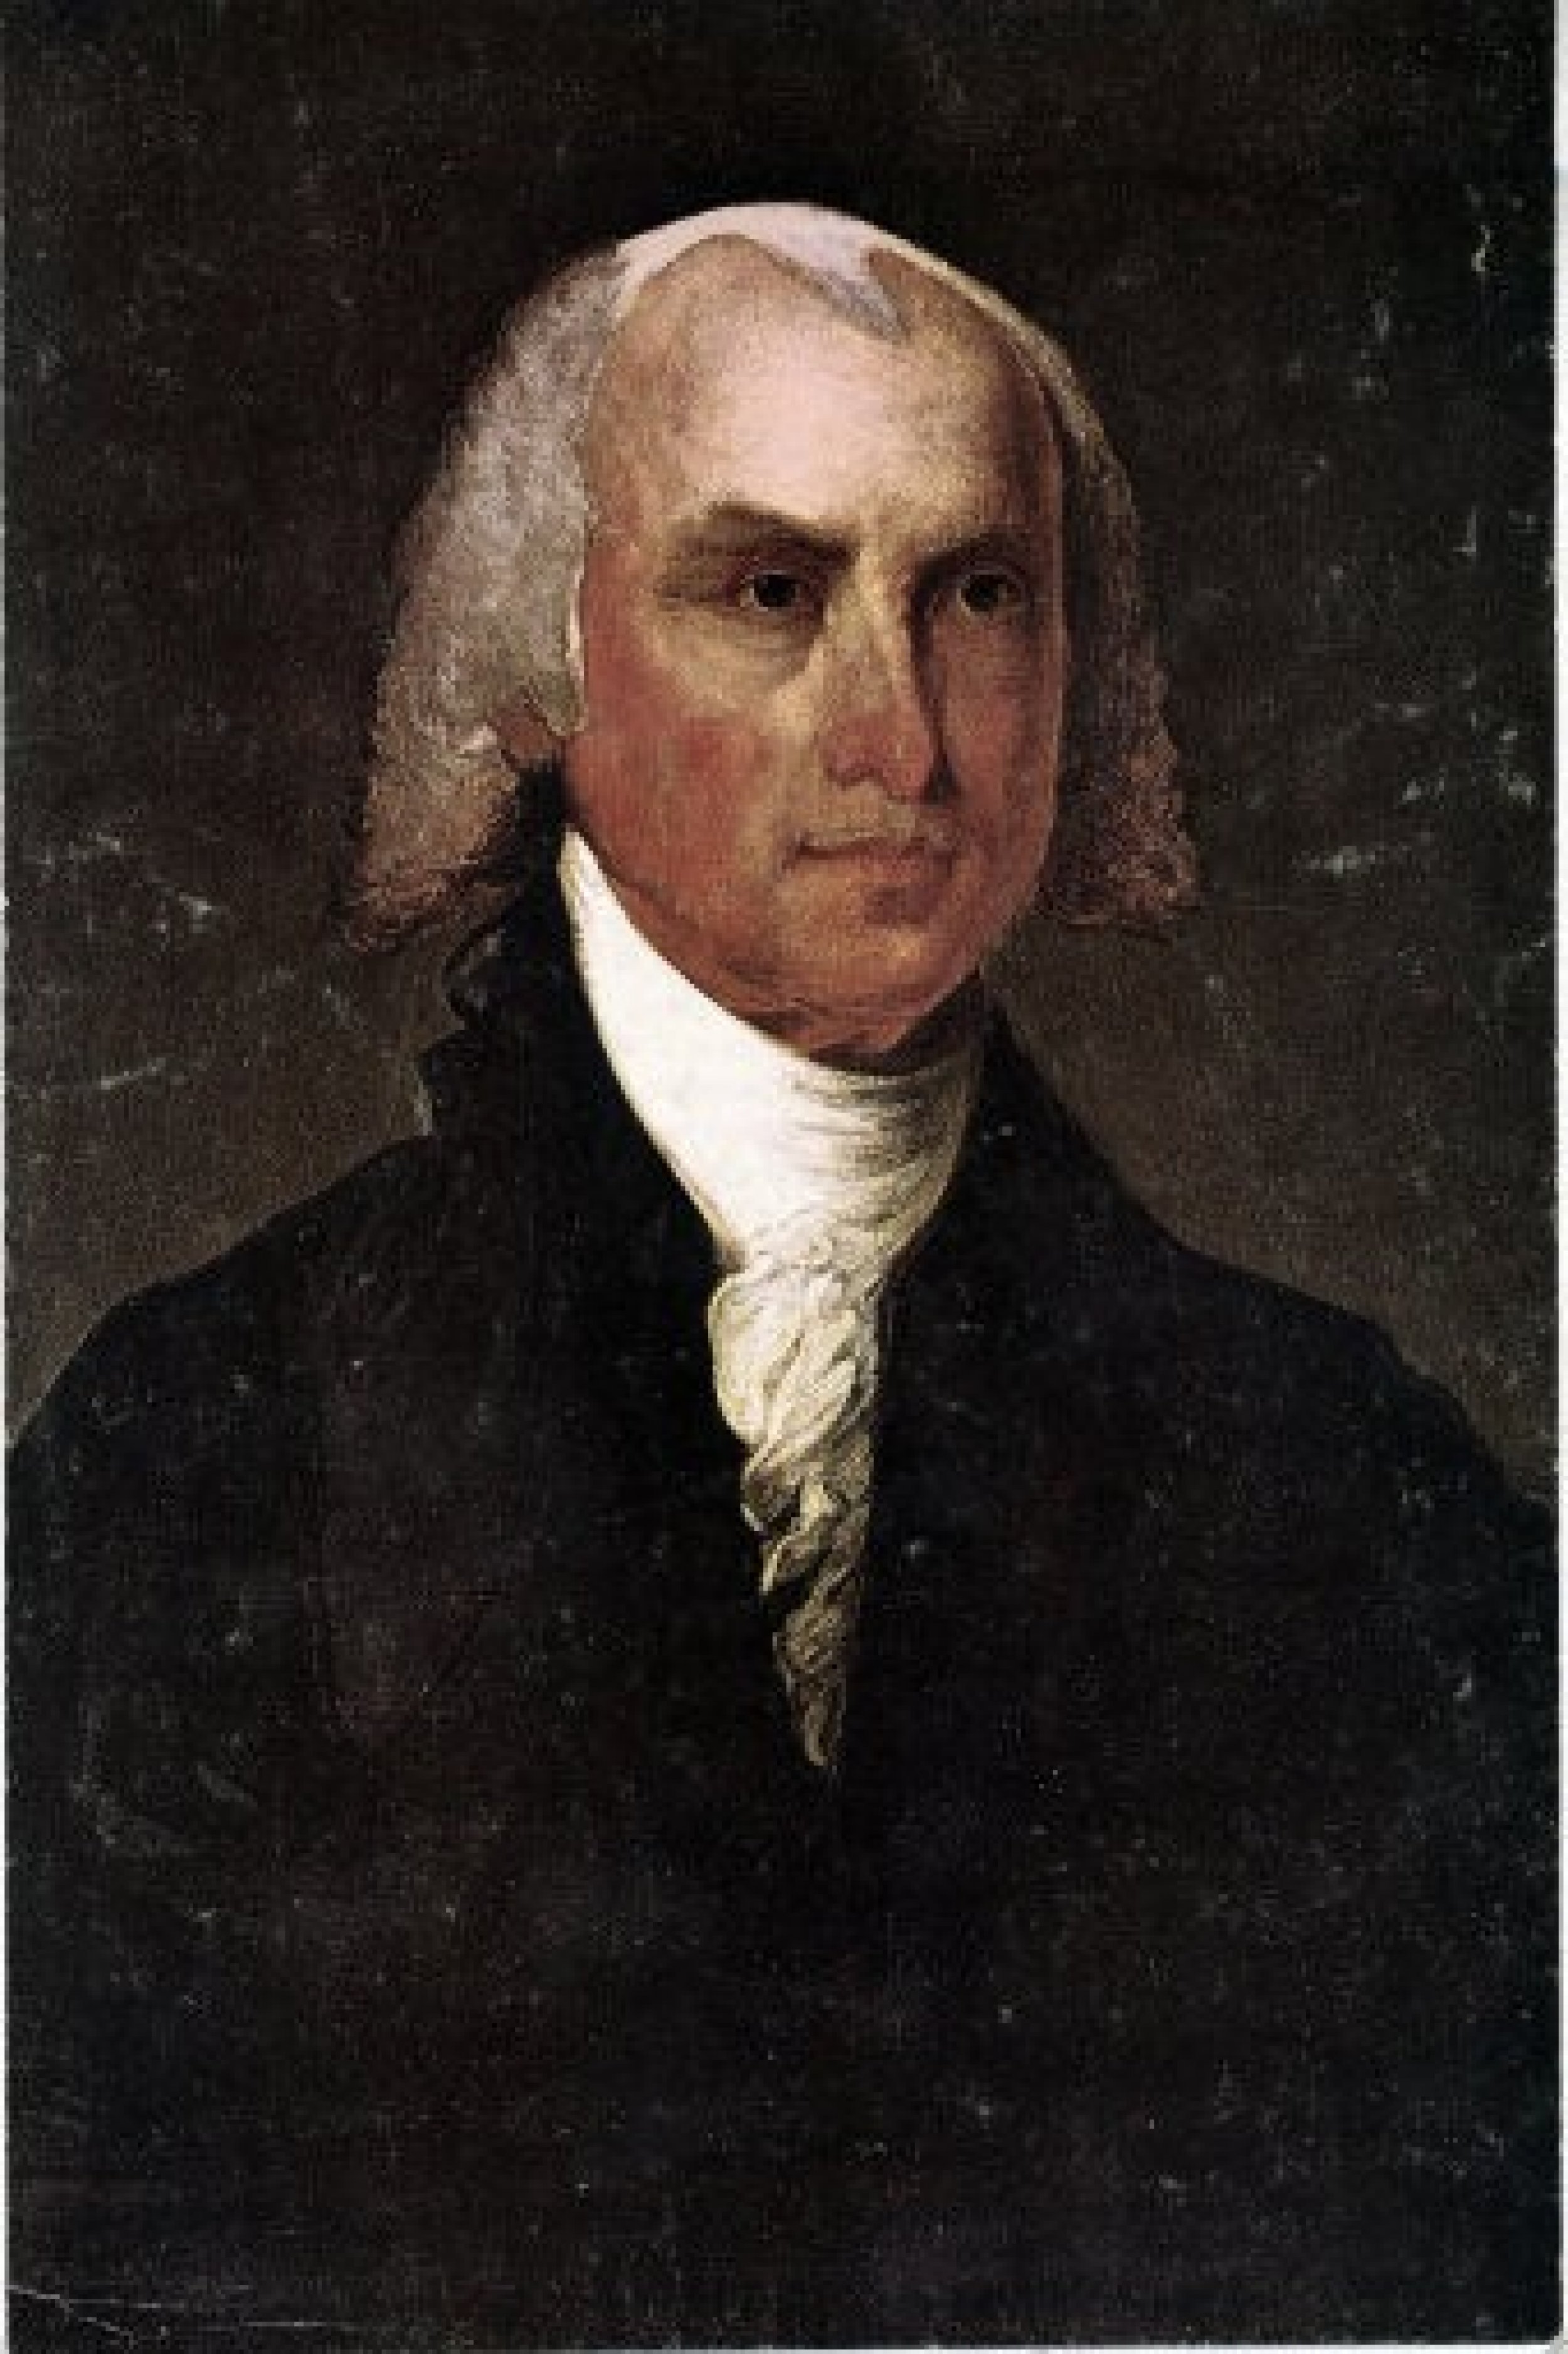 An undated photo of a portrait of U.S. President James Madison.  